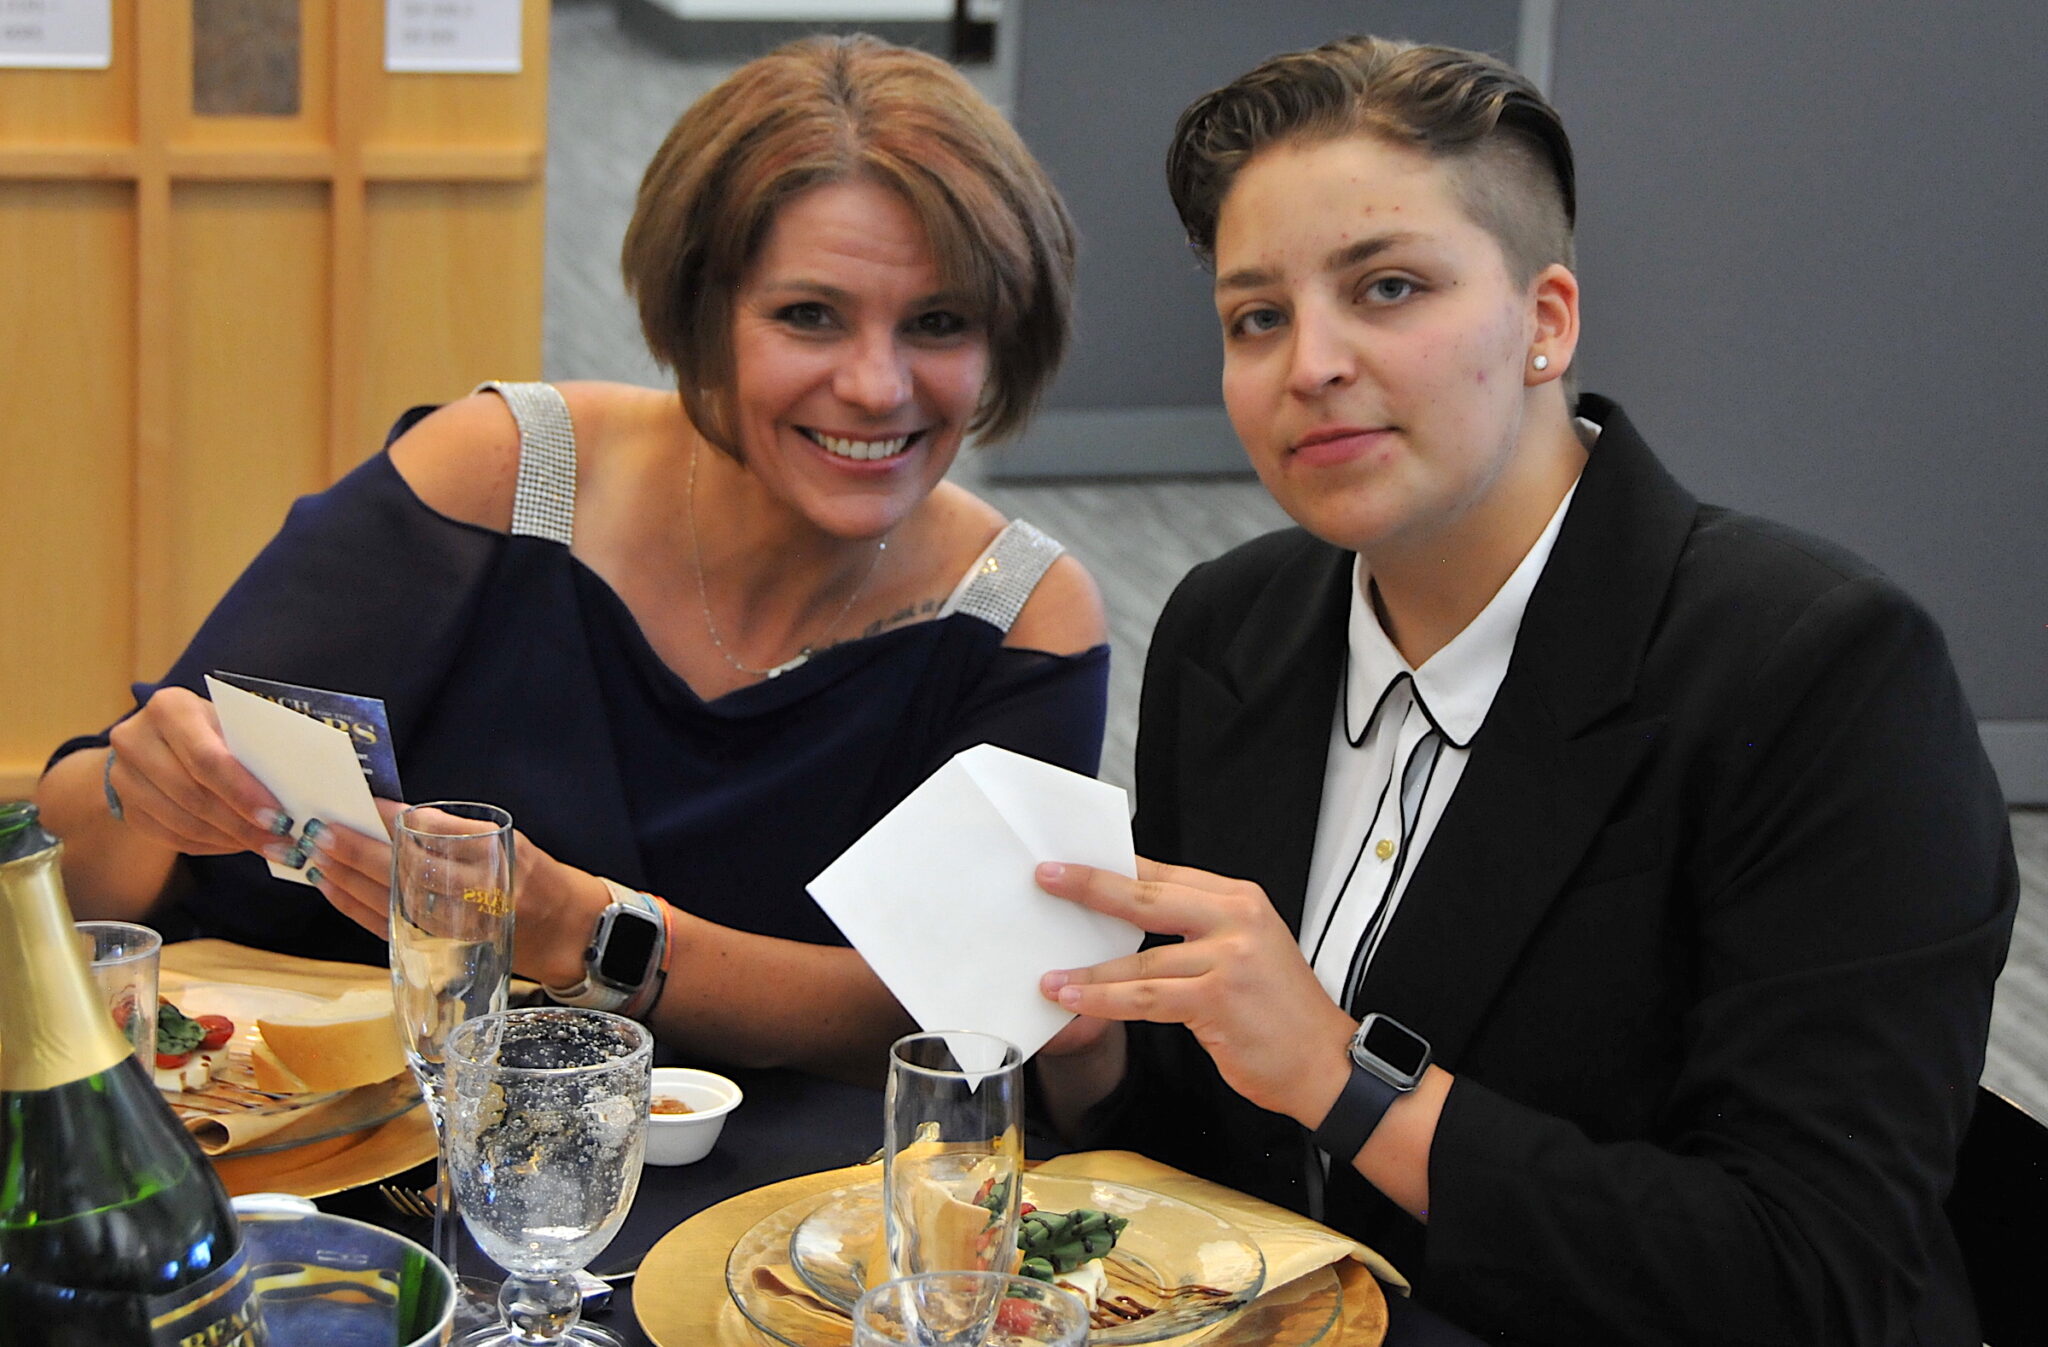 Reach for the Stars Gala Raises Record Amount for Students